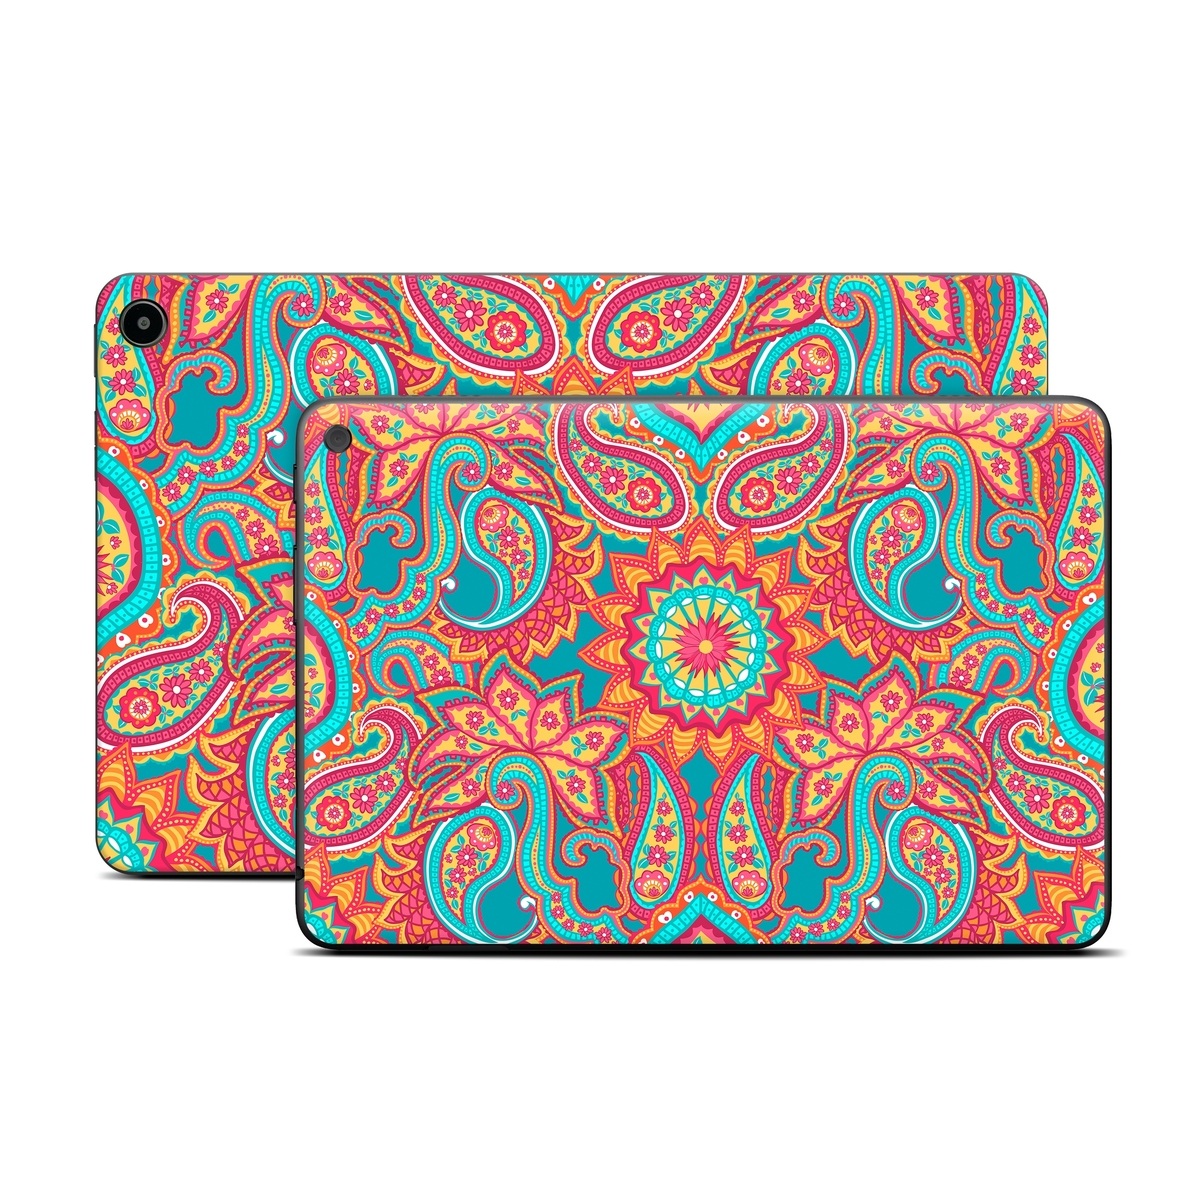 Amazon Fire Tablet Series Skin Skin design of Pattern, Paisley, Motif, Visual arts, Design, Art, Textile, Psychedelic art, with orange, yellow, blue, red colors